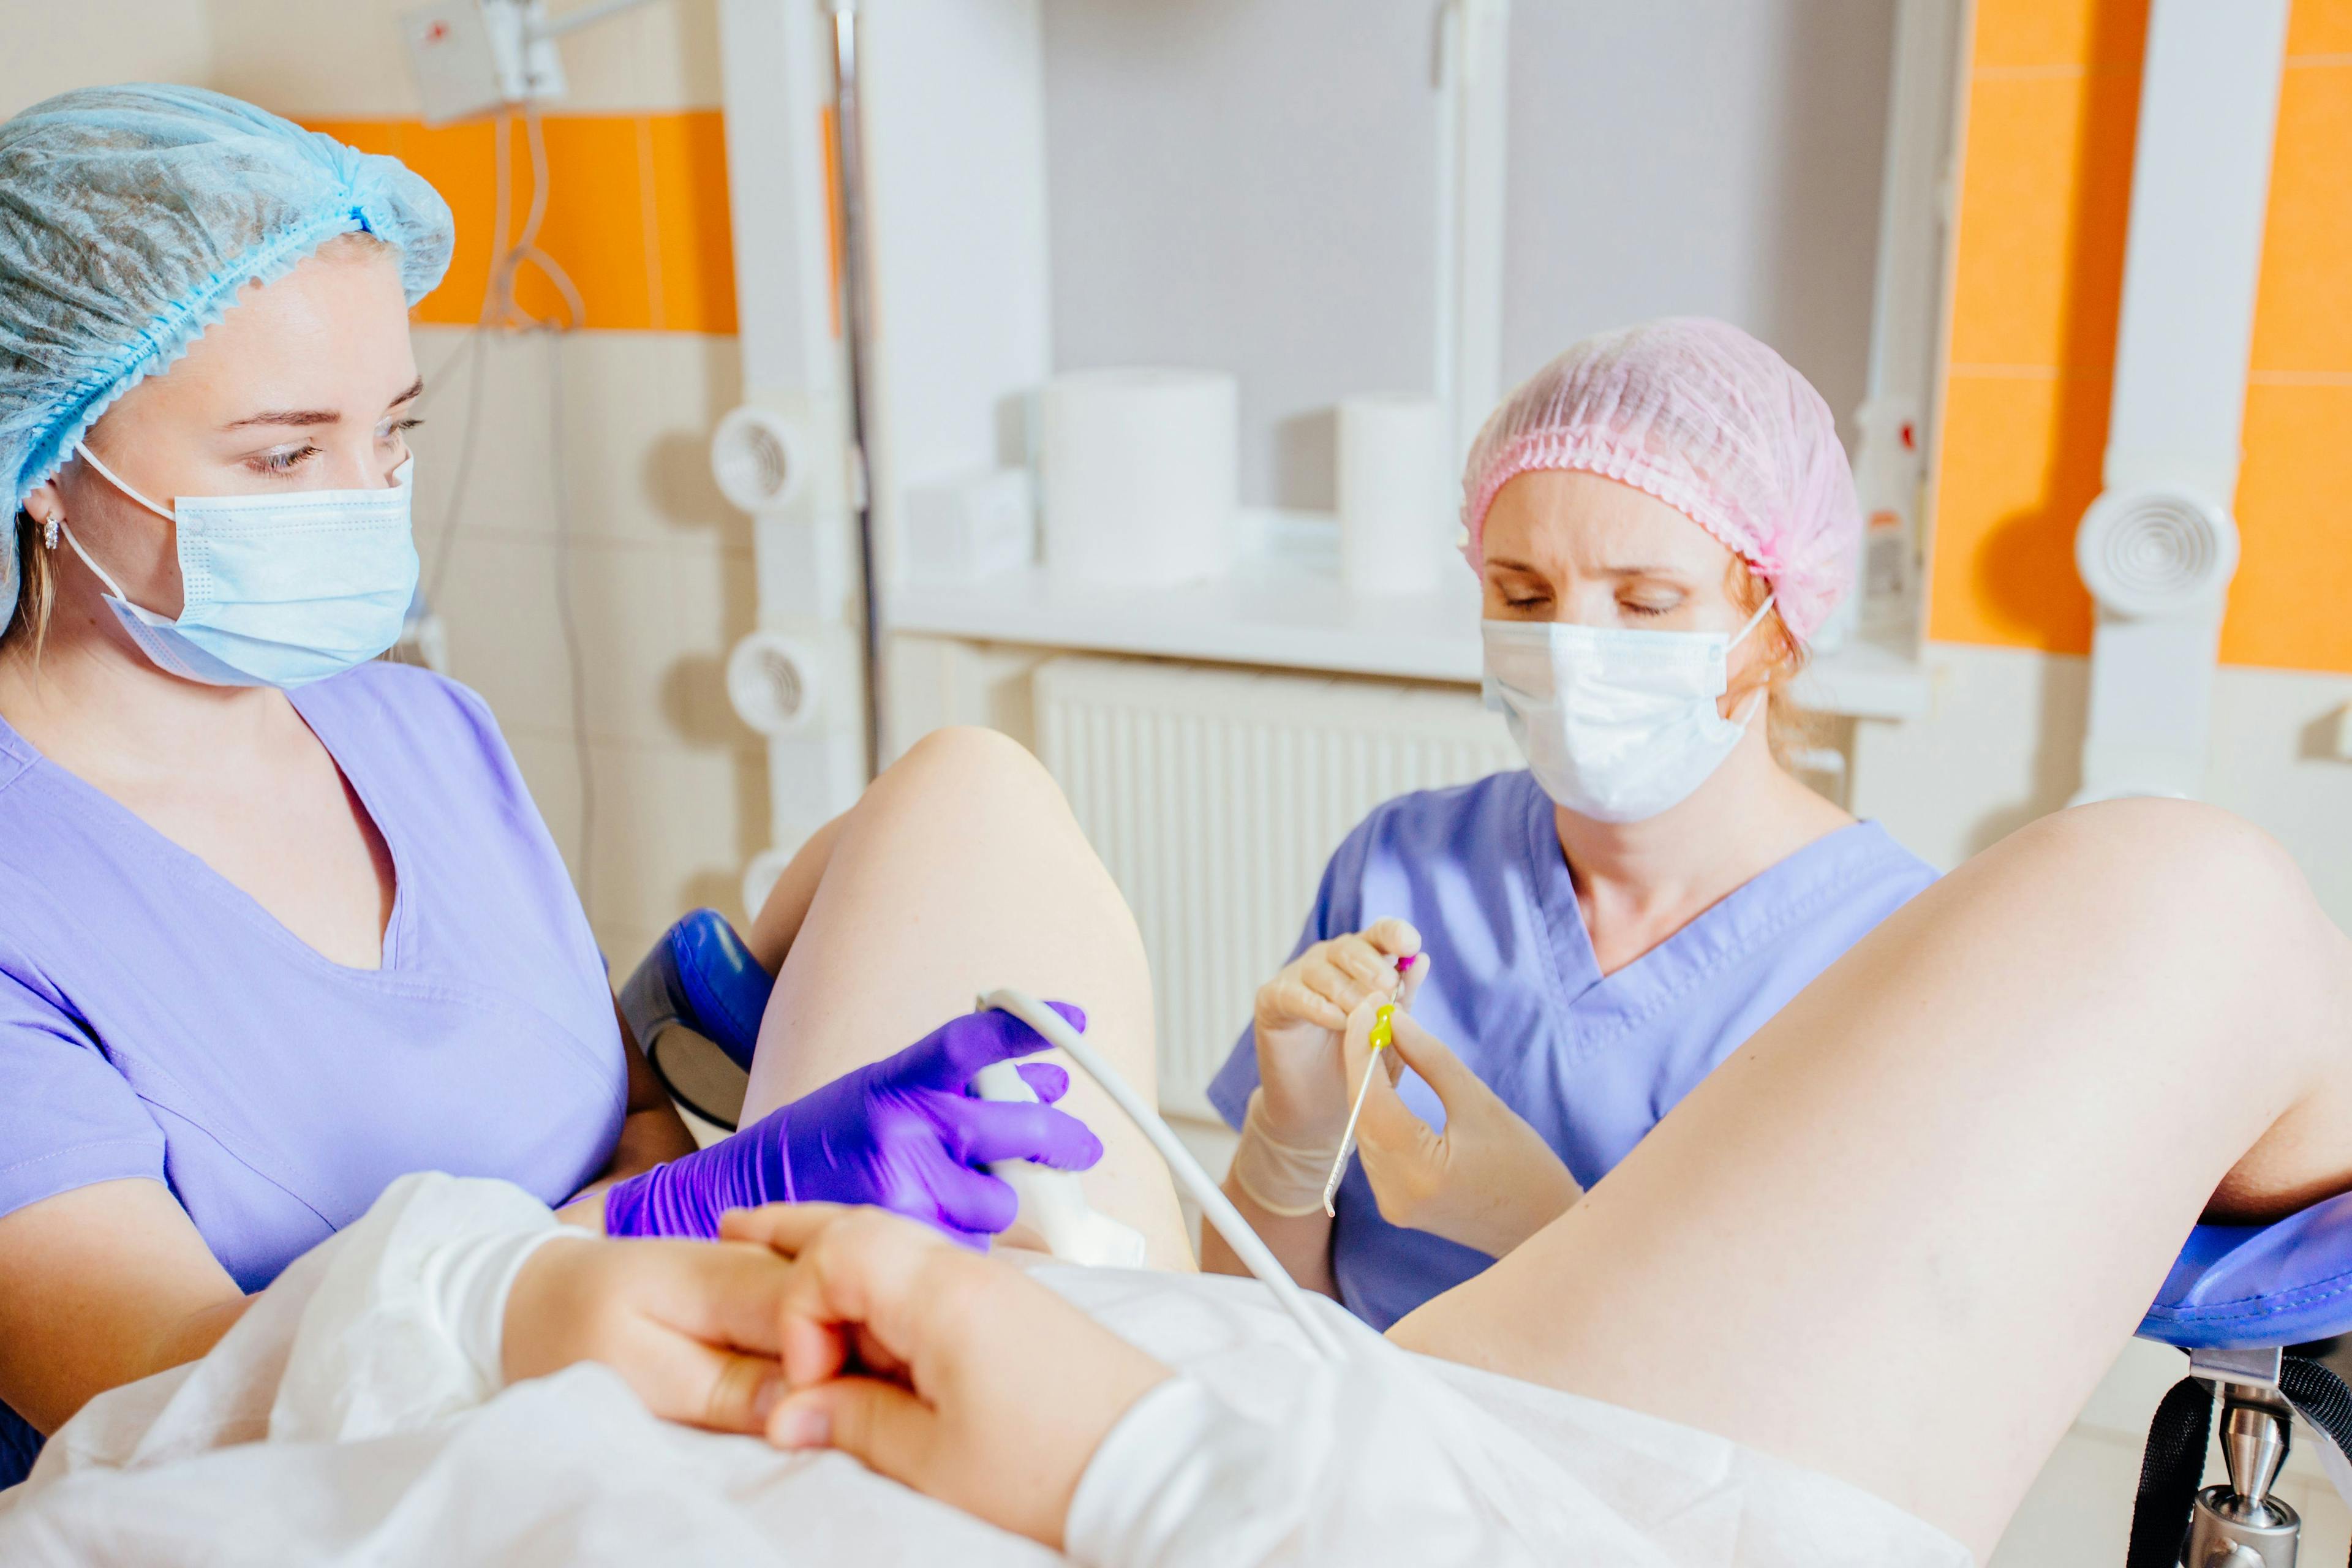 Does endometrial scratching improve live birth rate in IVF cases?